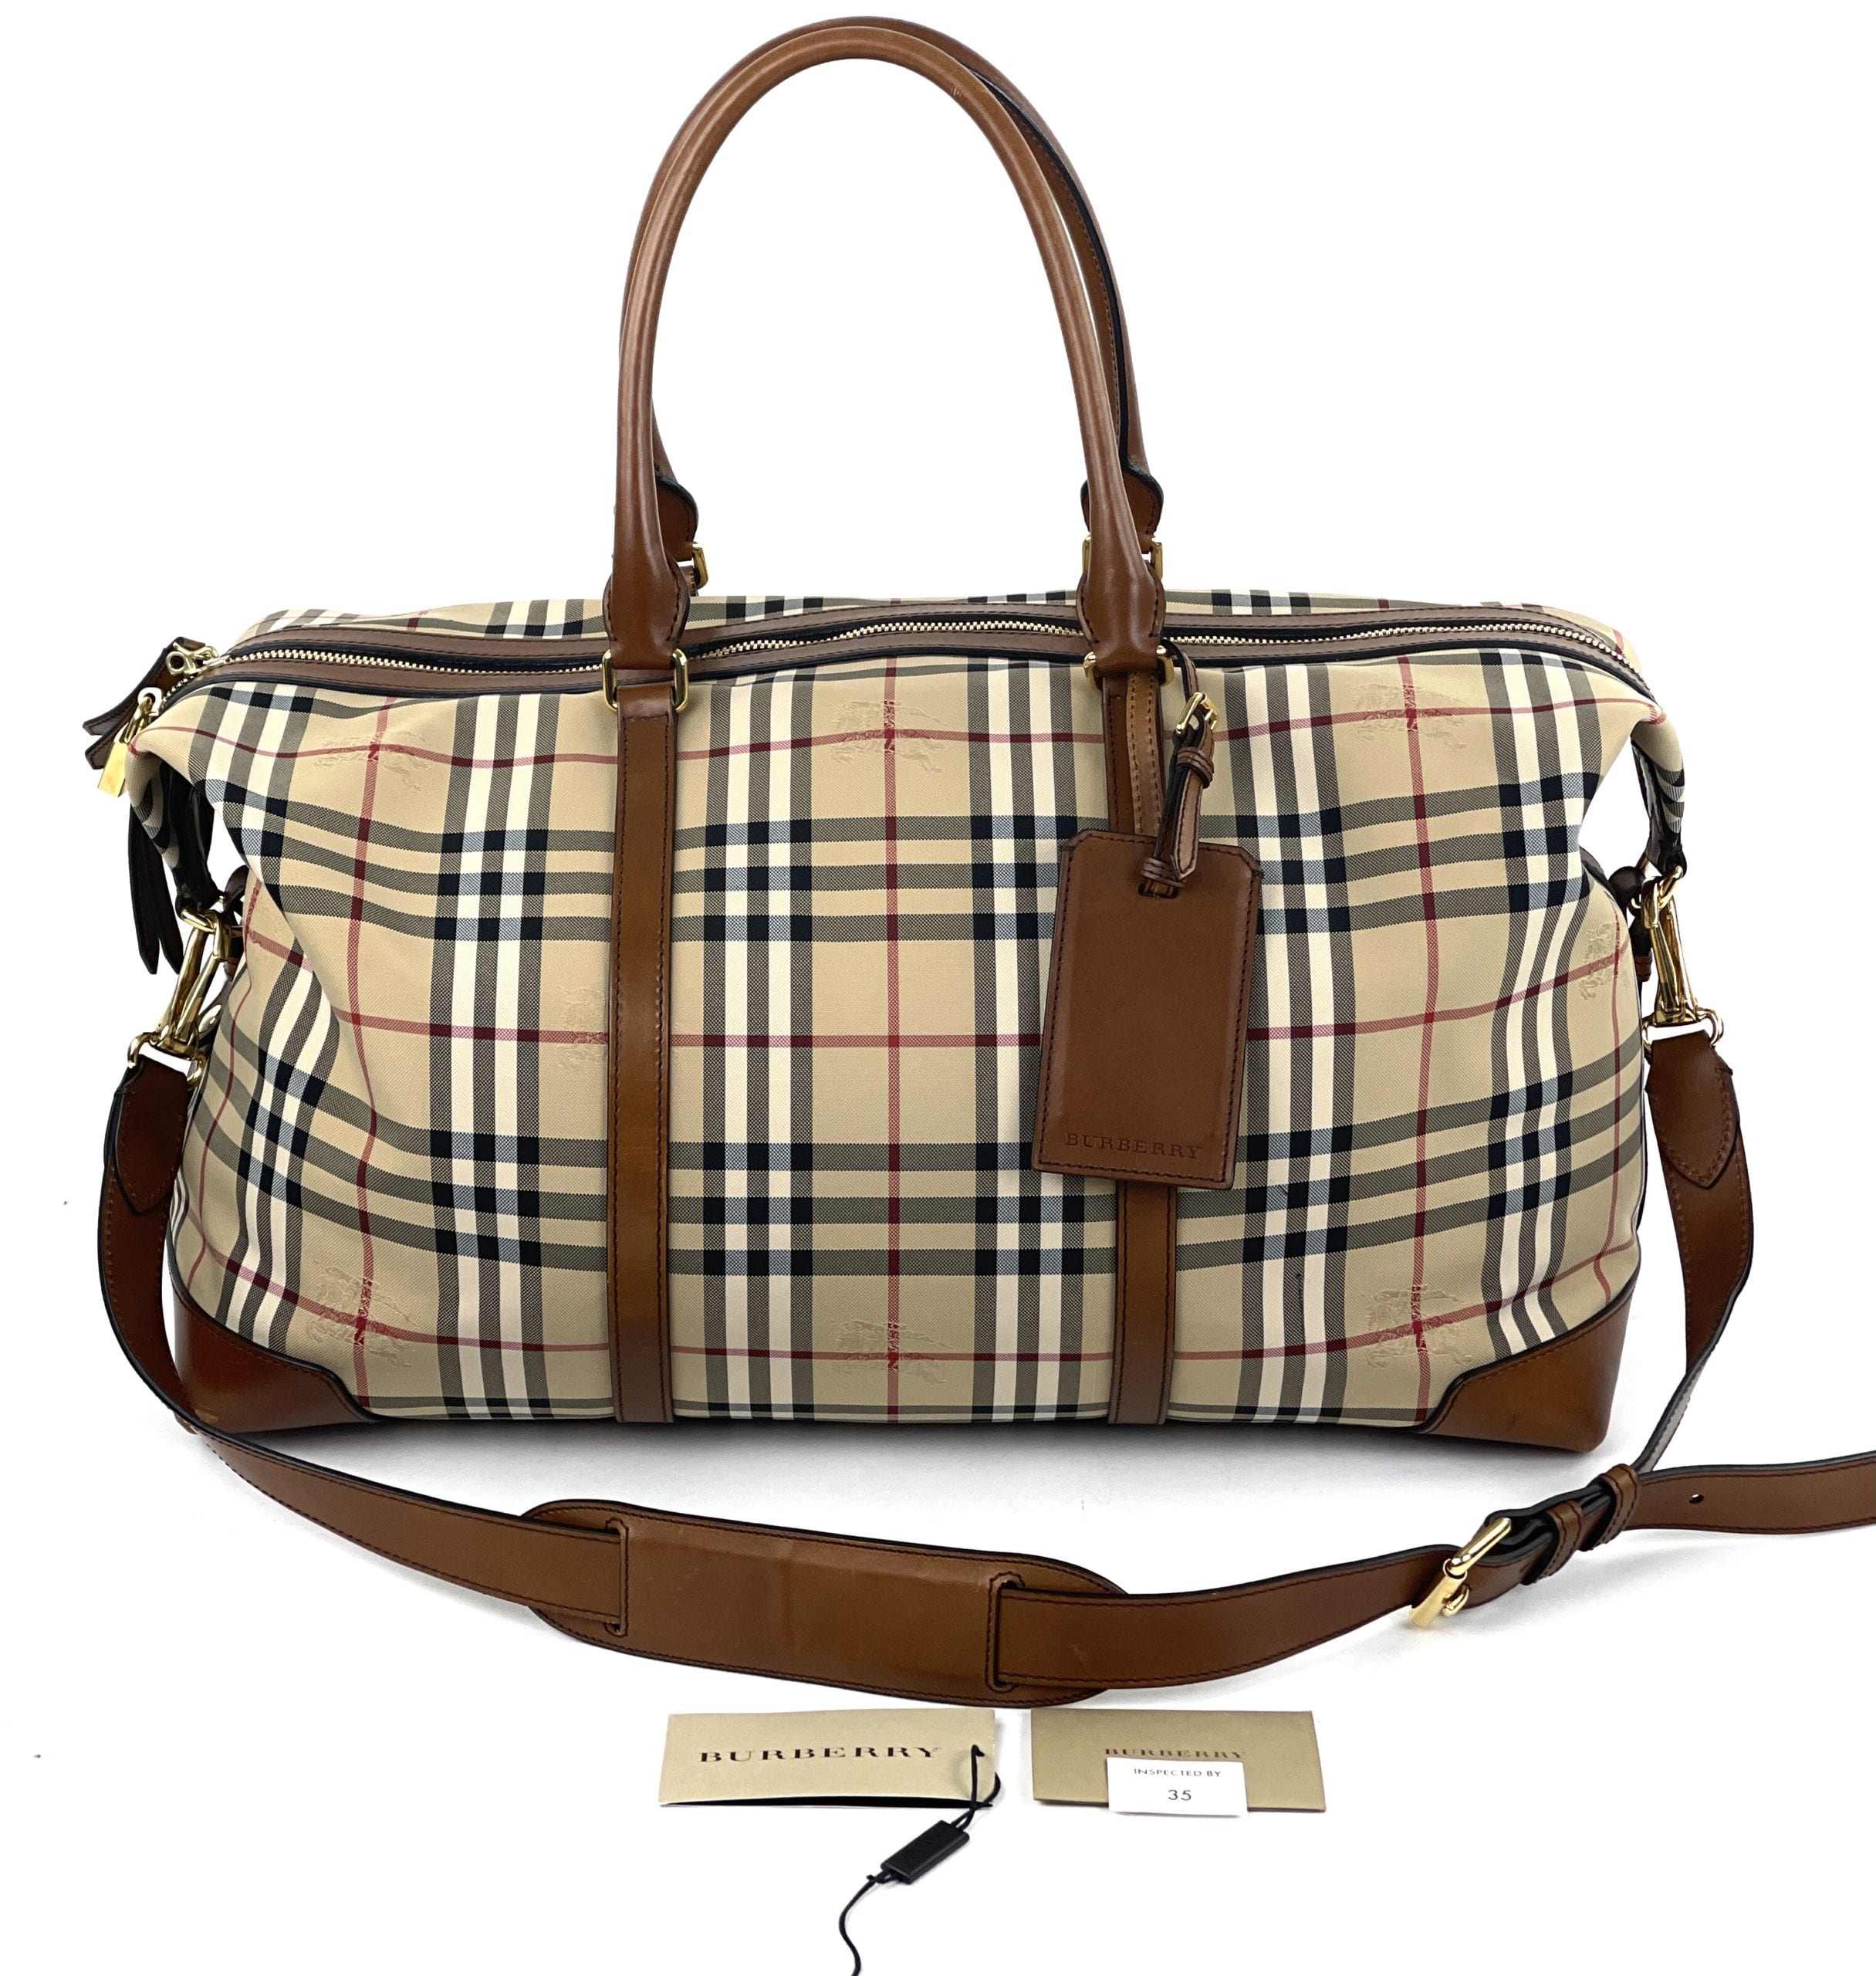 Burberry Horseferry Check Large Alchester Holdall Duffle Bag - A